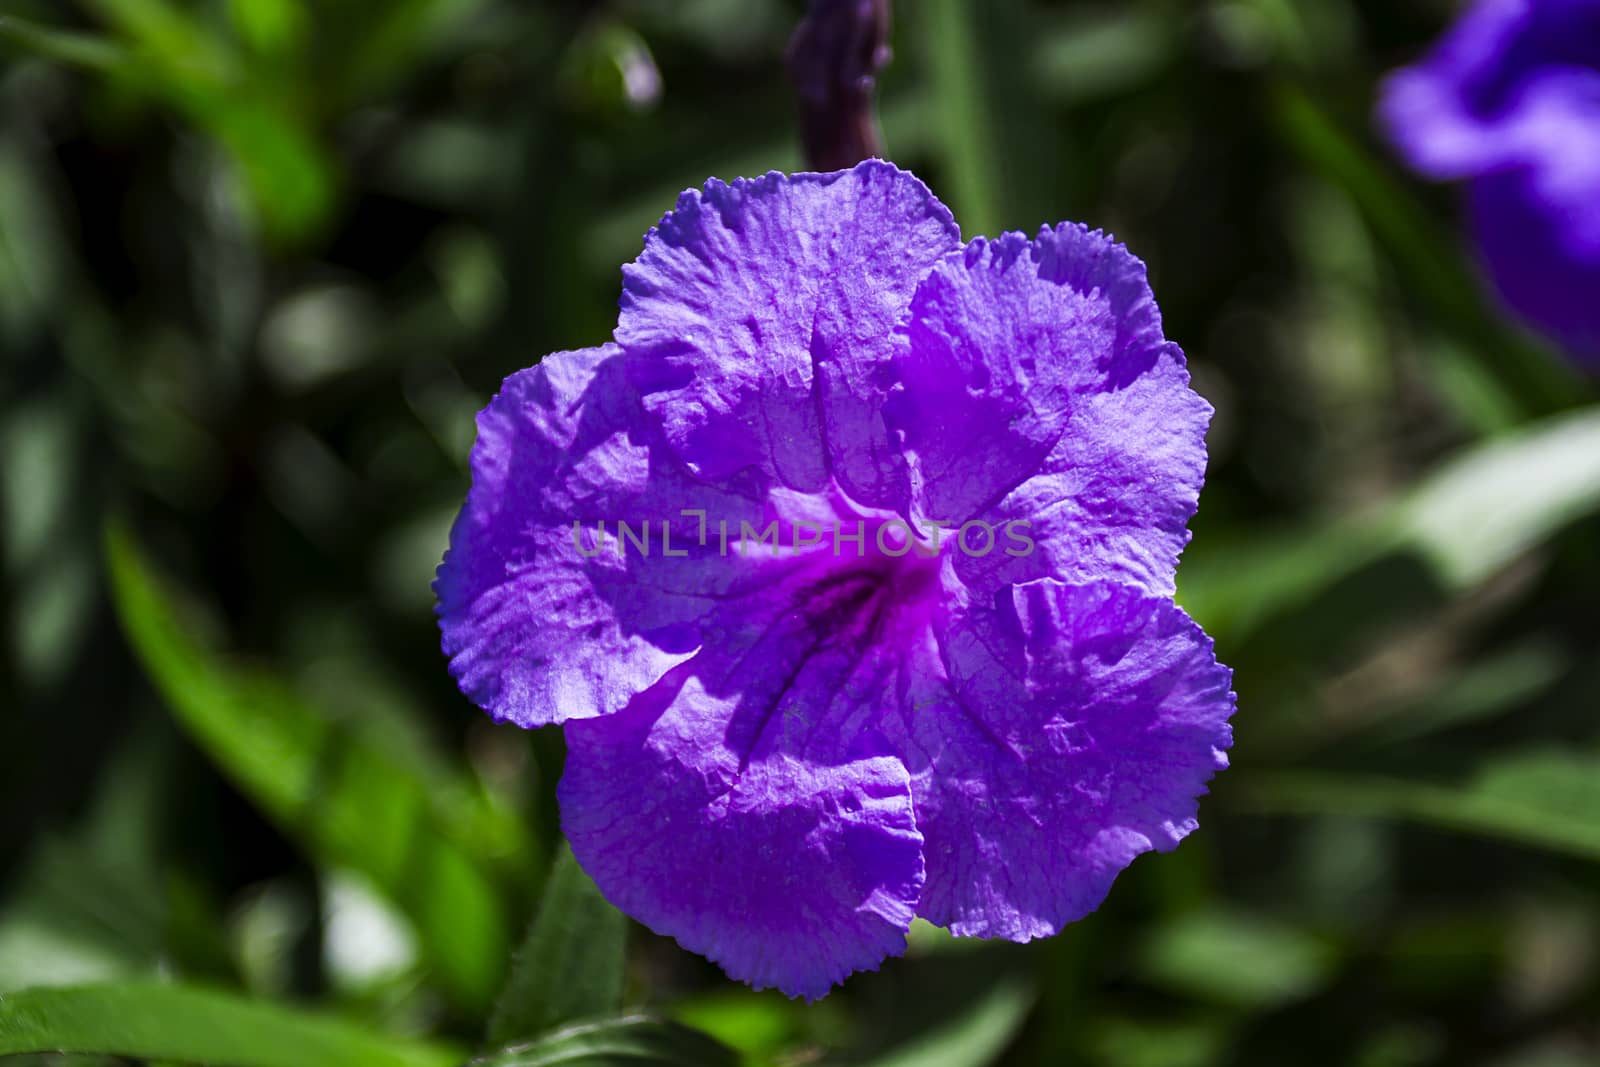 close up of a purple flower against green grass